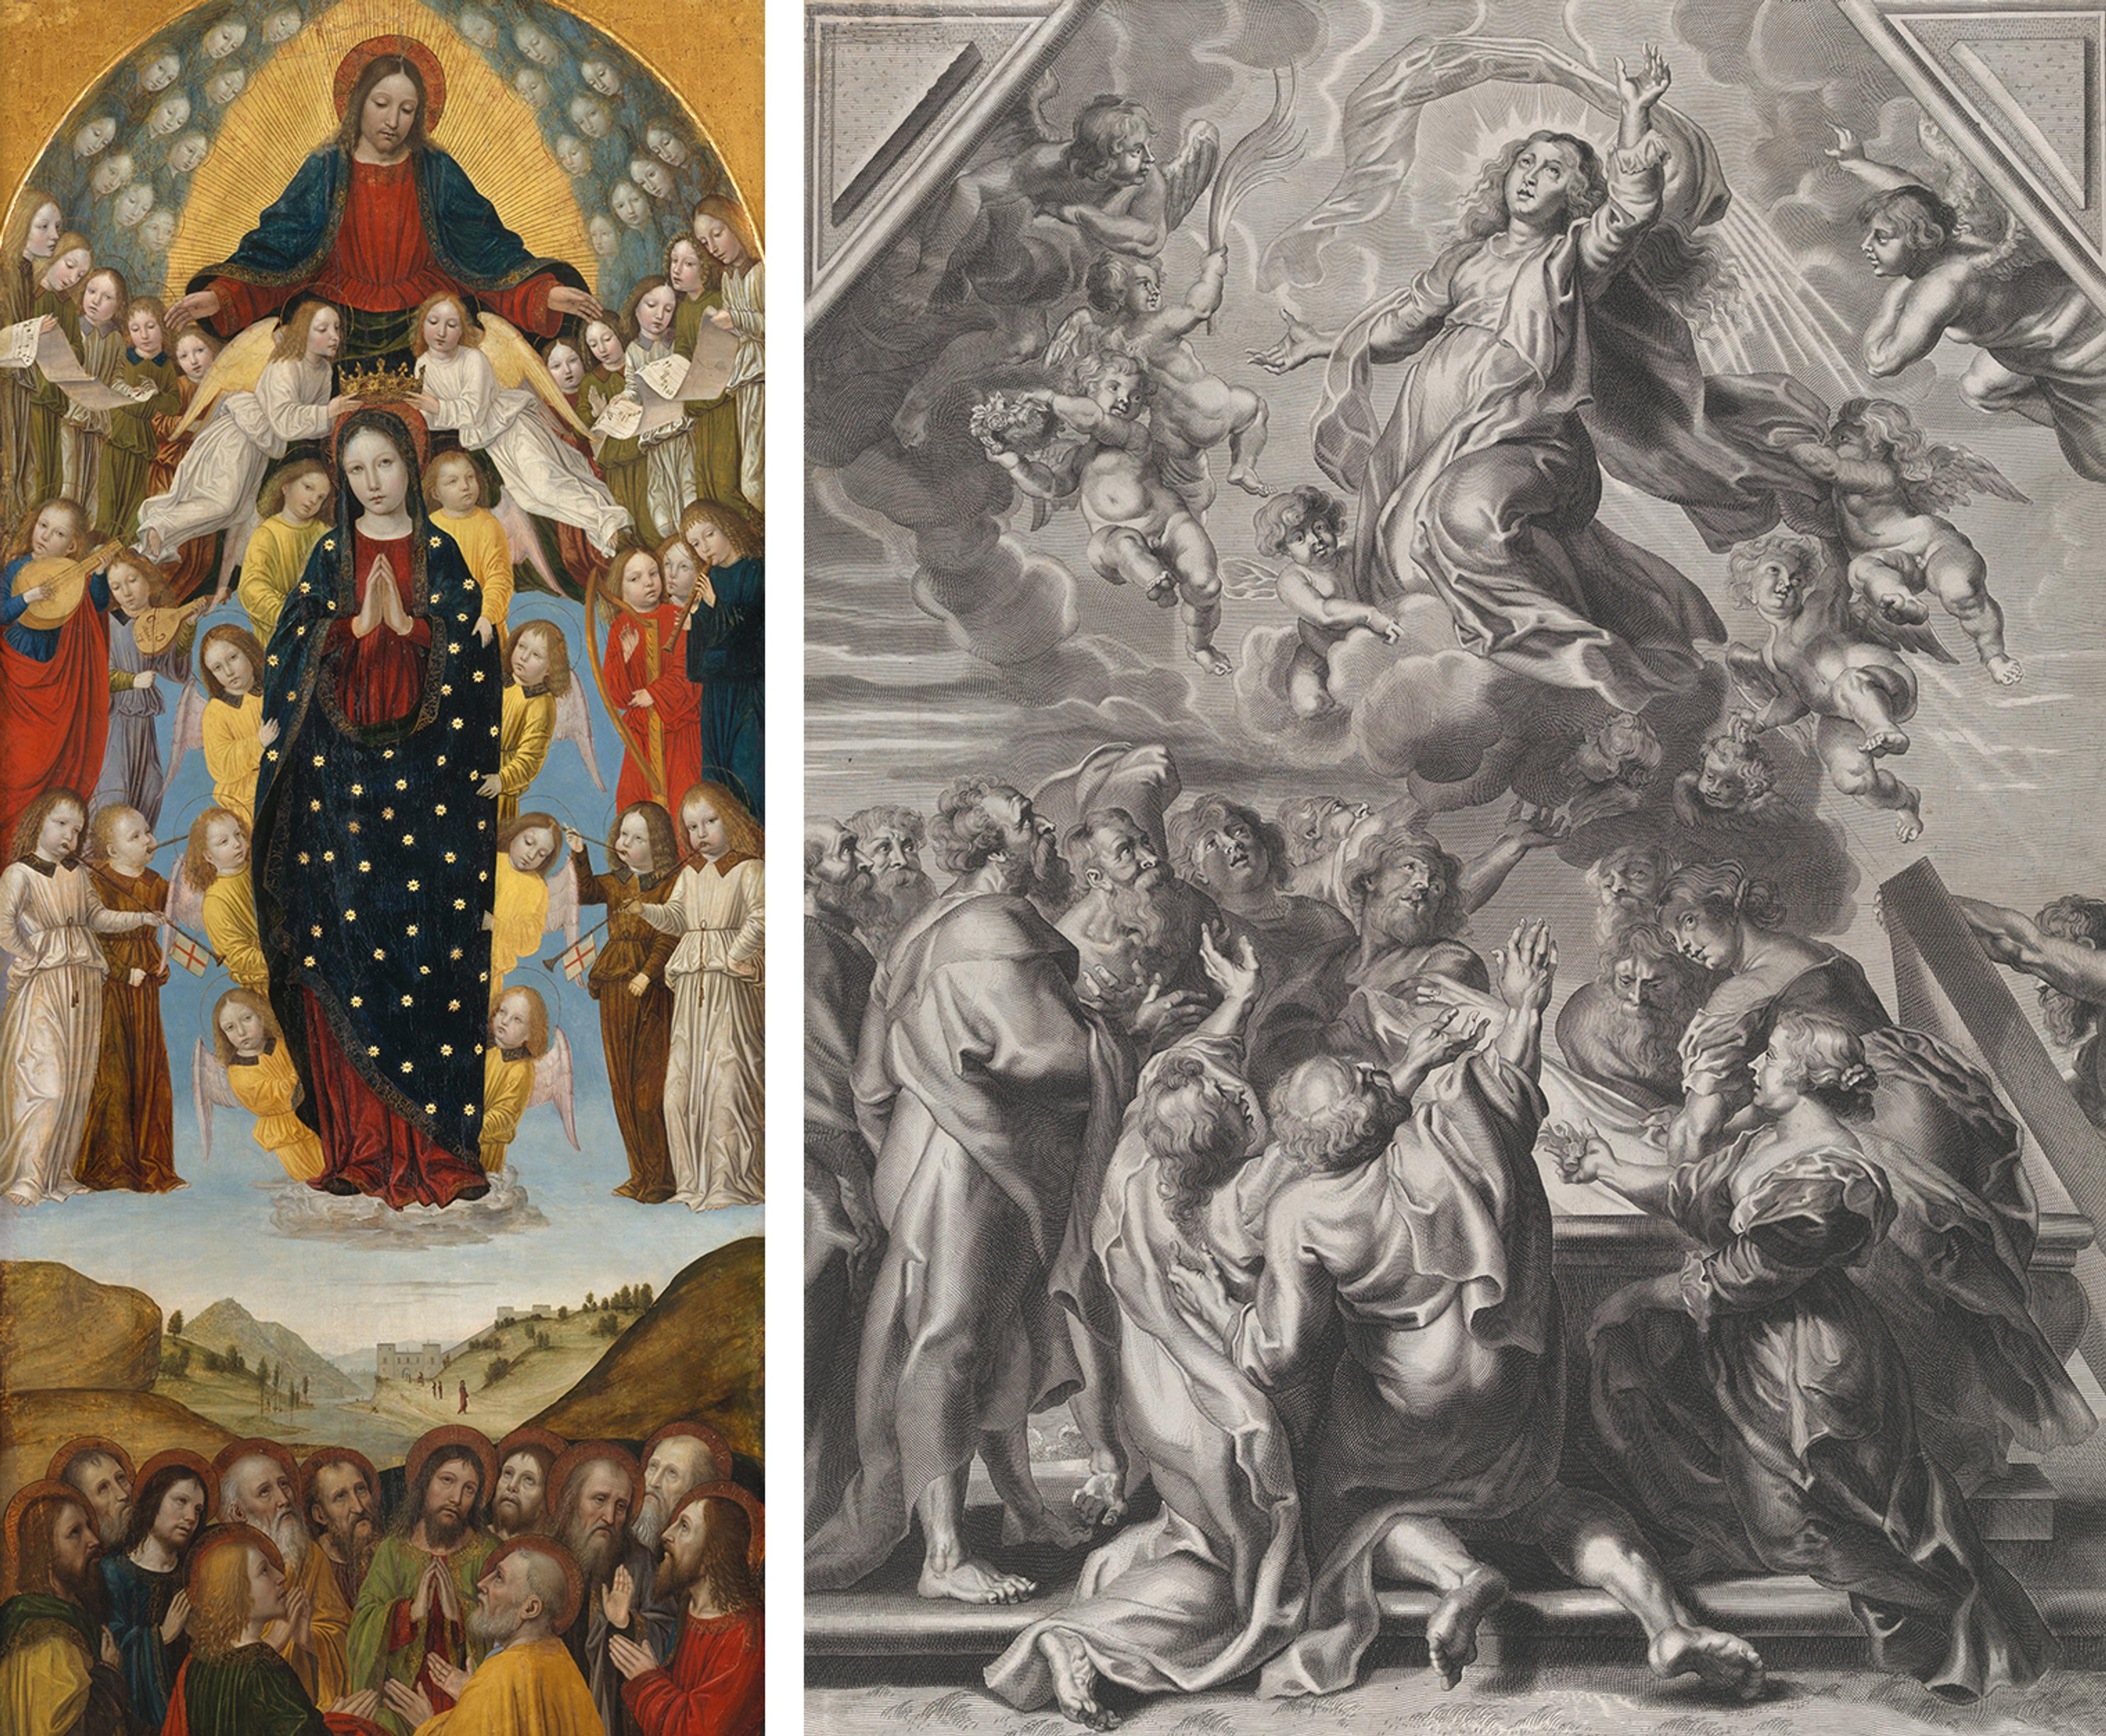 Two different images of Scenes of the Assumption of the Virgin.